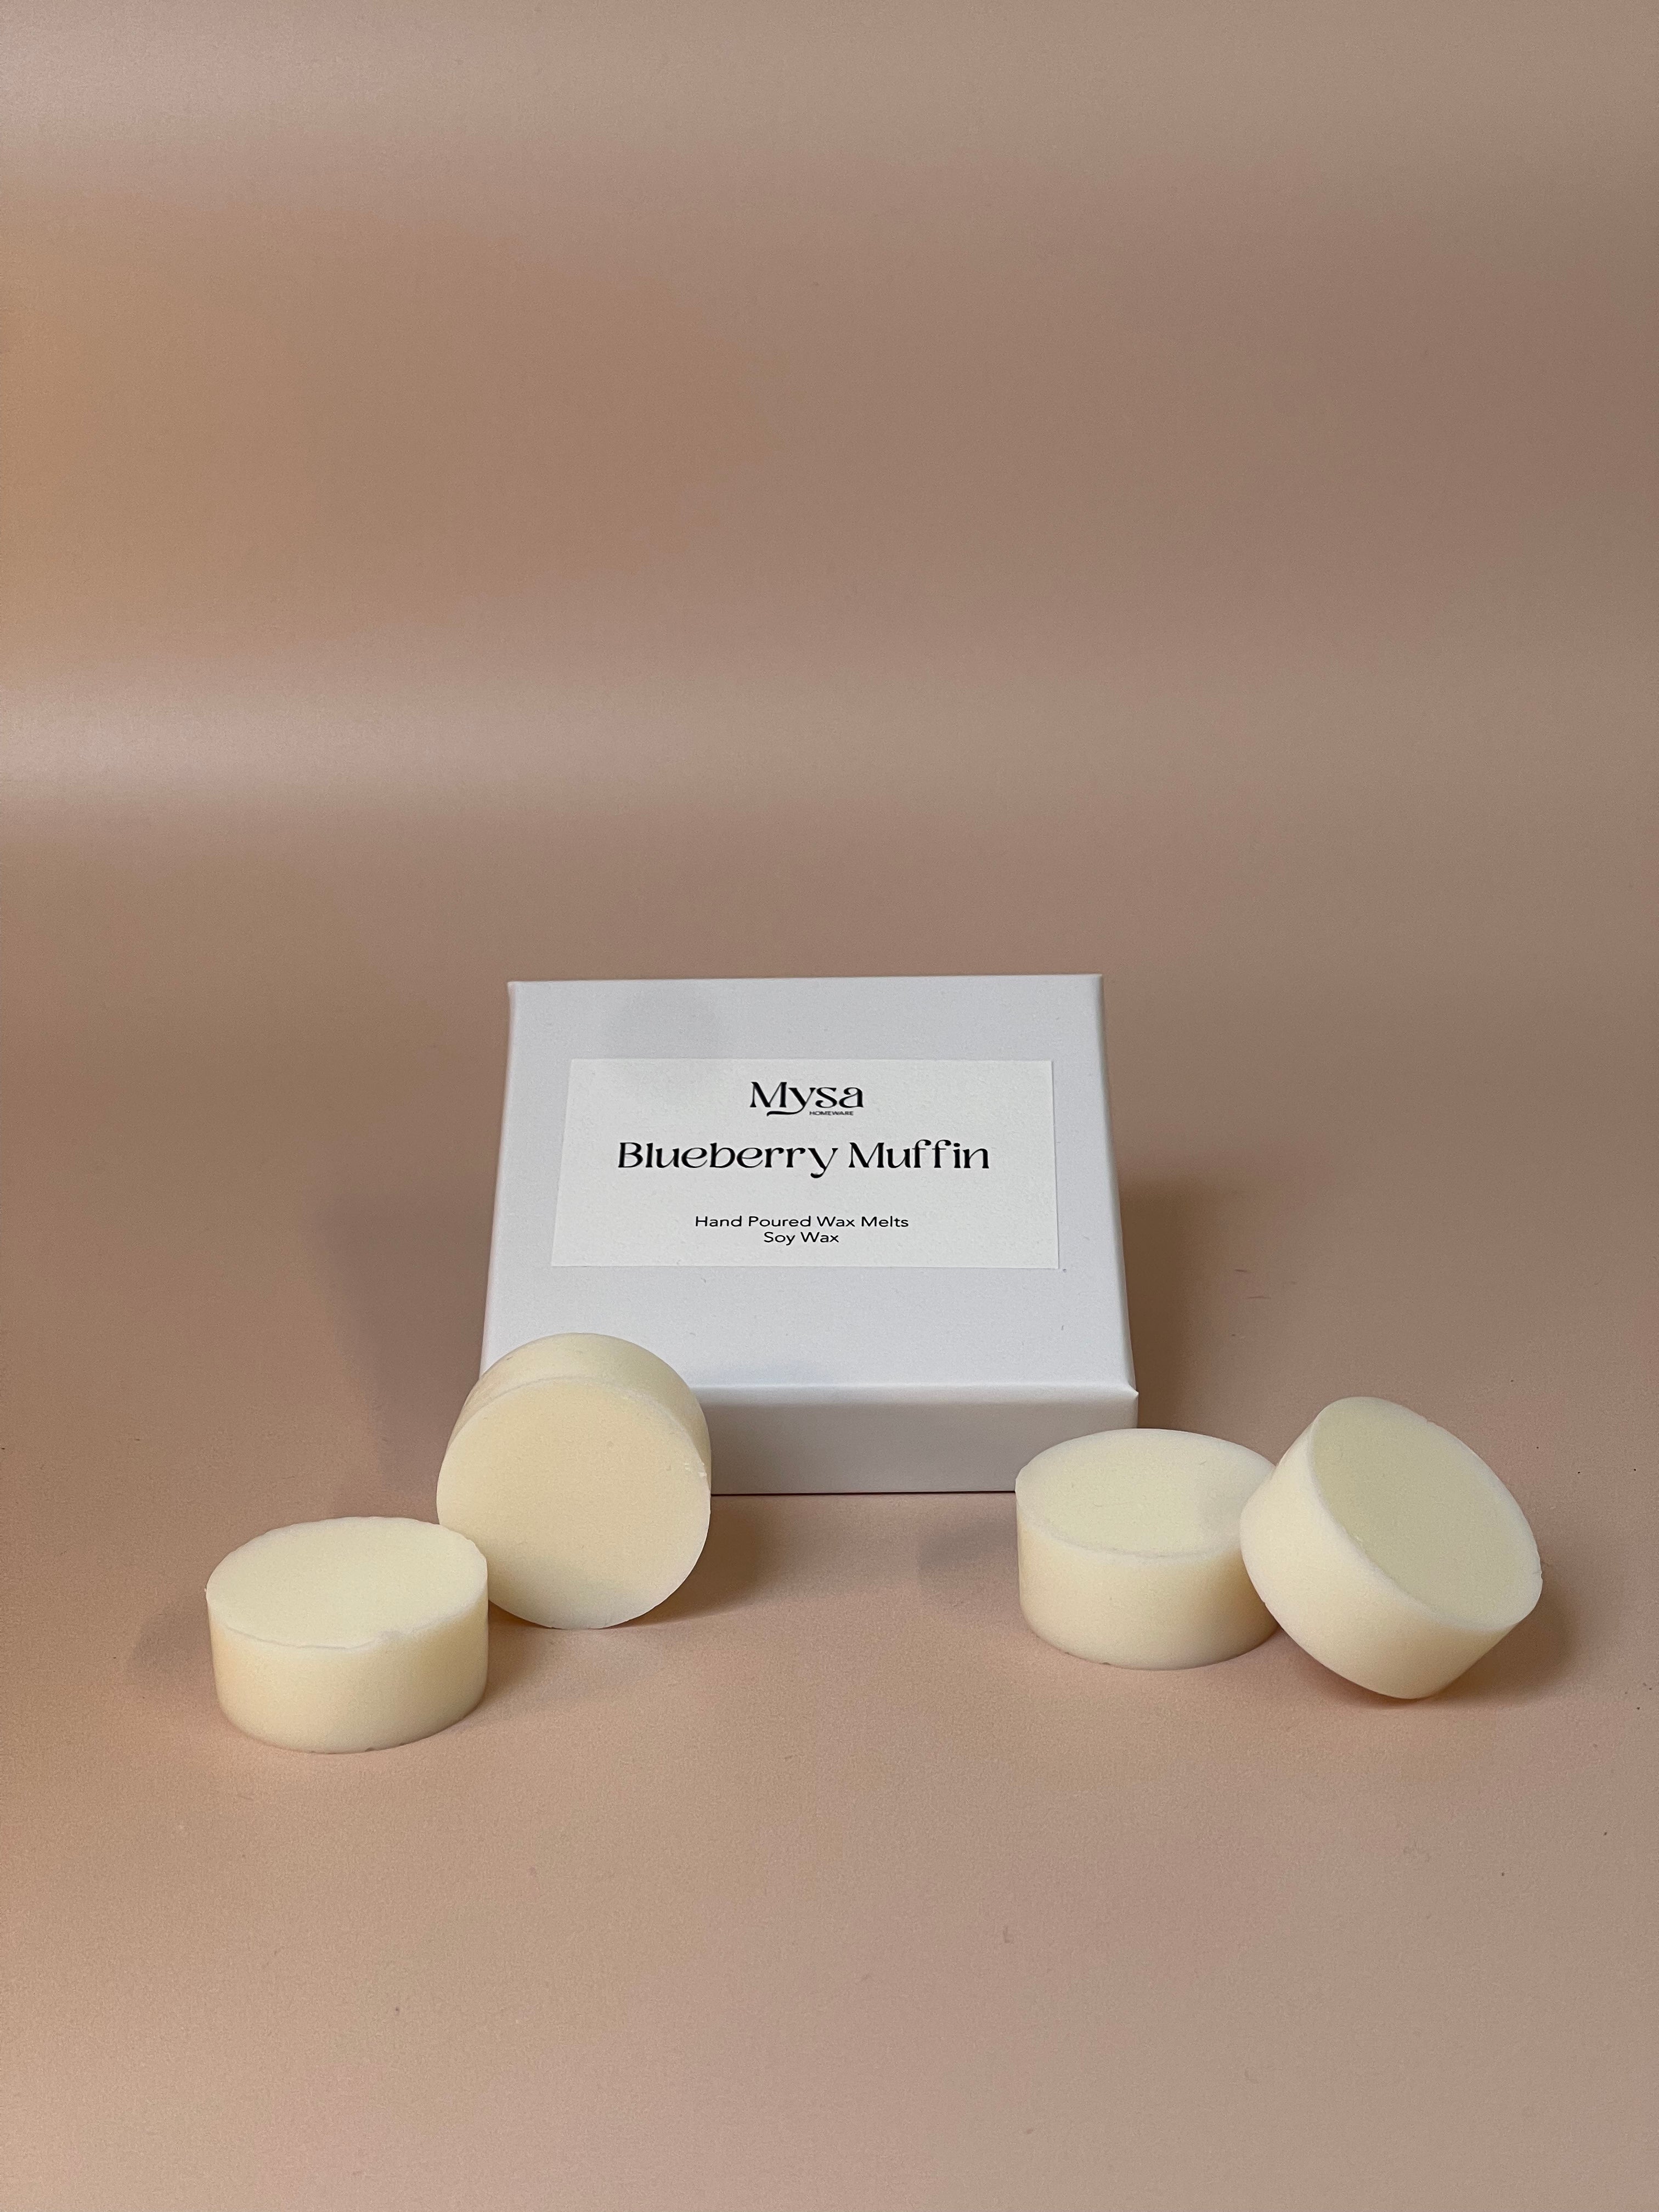 Blueberry Muffin luxury scented wax melts in gift box, with soy wax and blueberry and vanilla fragrance.